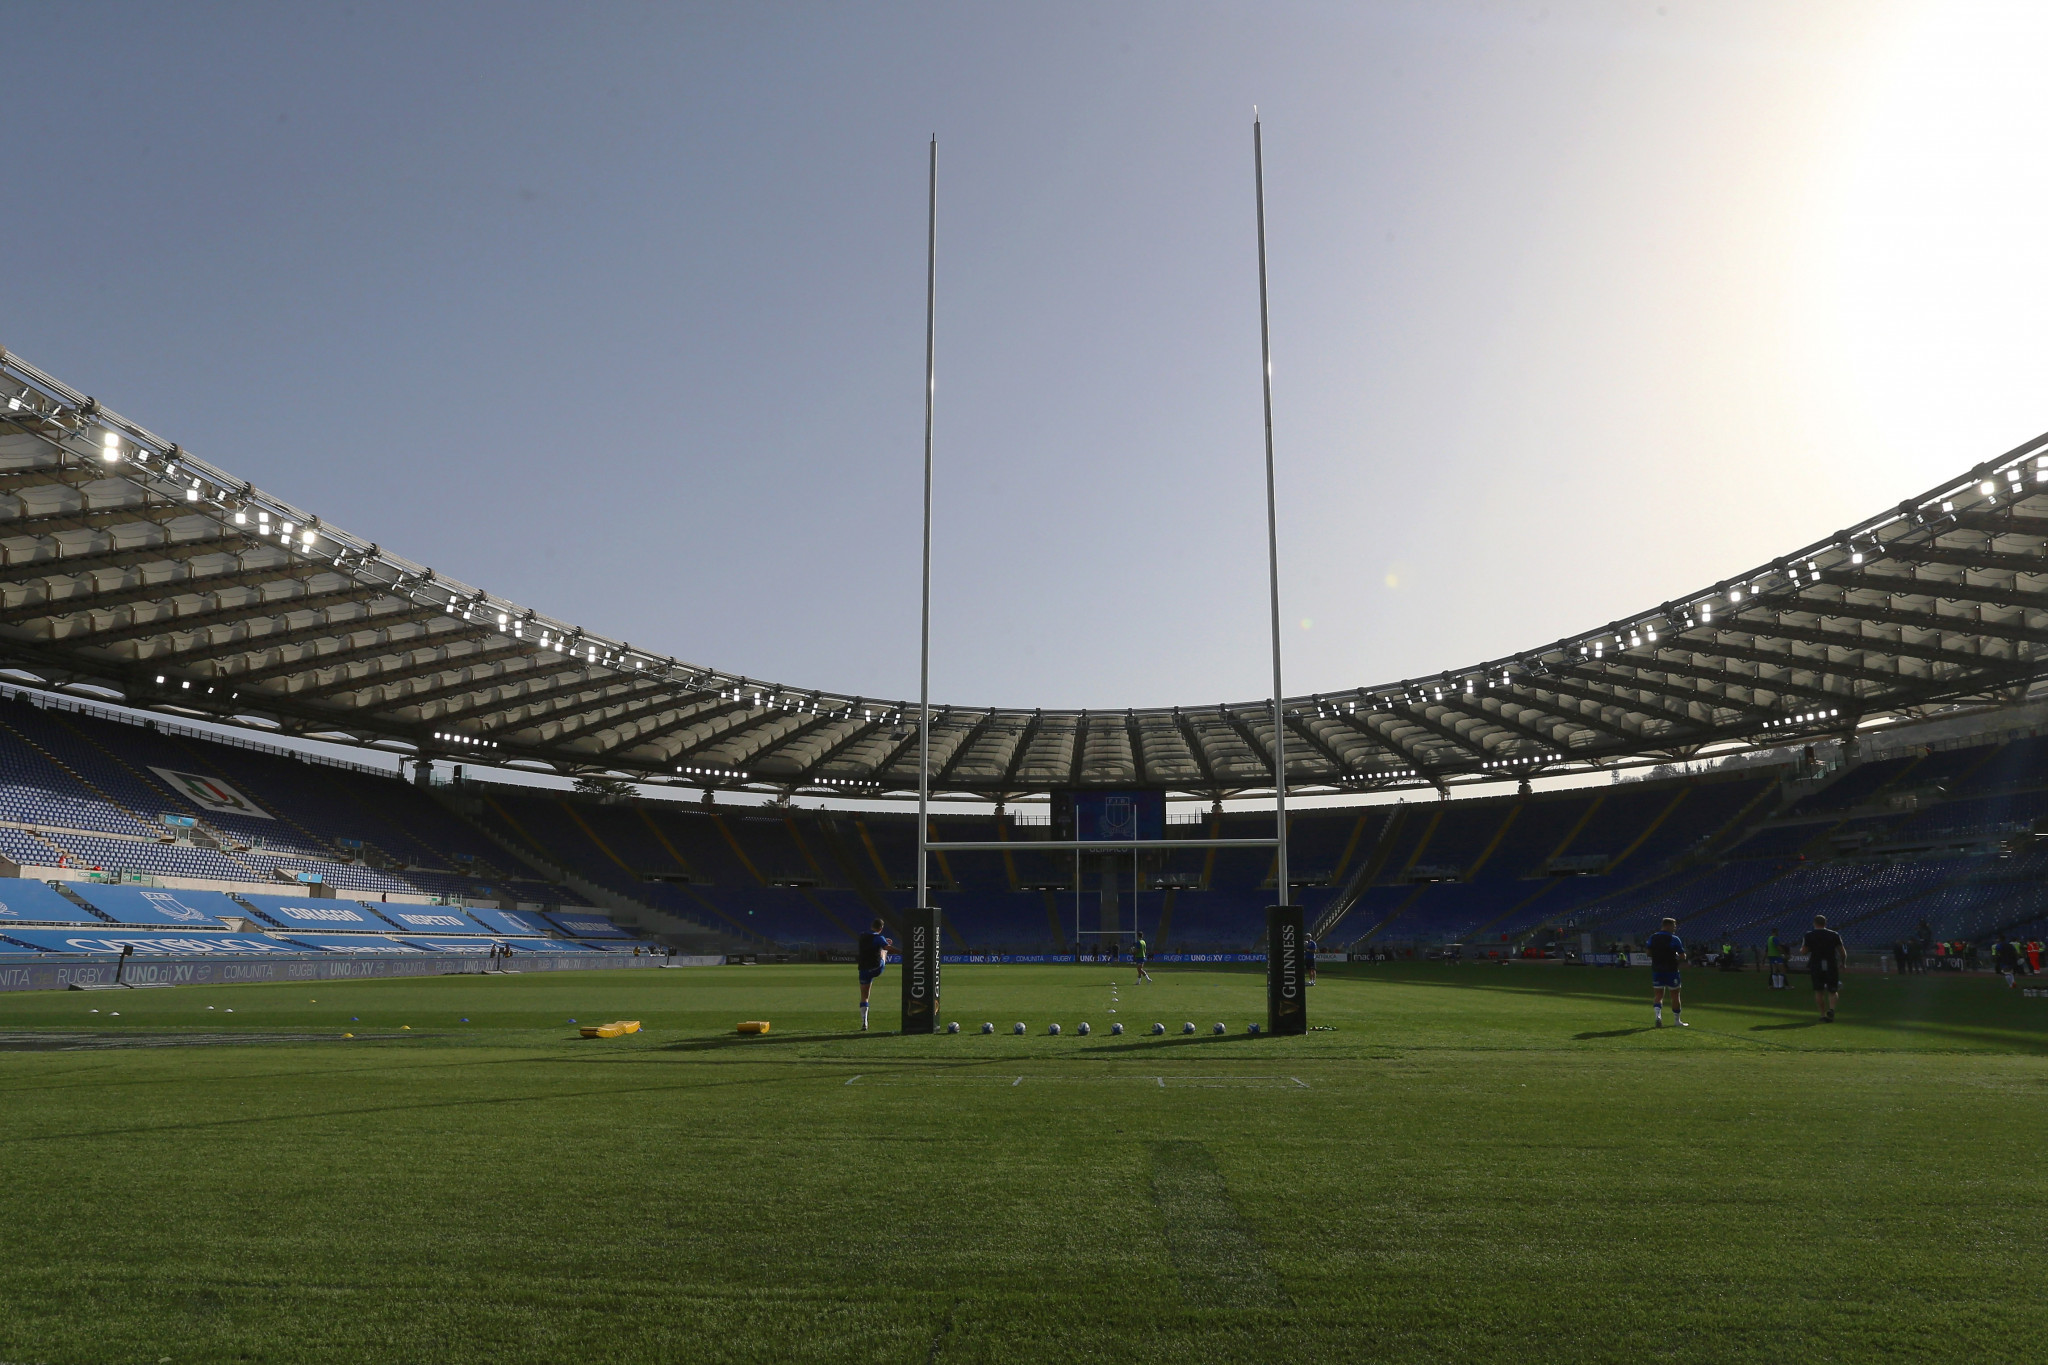 The FIR hopes that Italy's co-hosting of the 2032 UEFA European Championship will see improvements made to venues, therefore strengthening Italian Rugby World Cup bids ©Getty Images